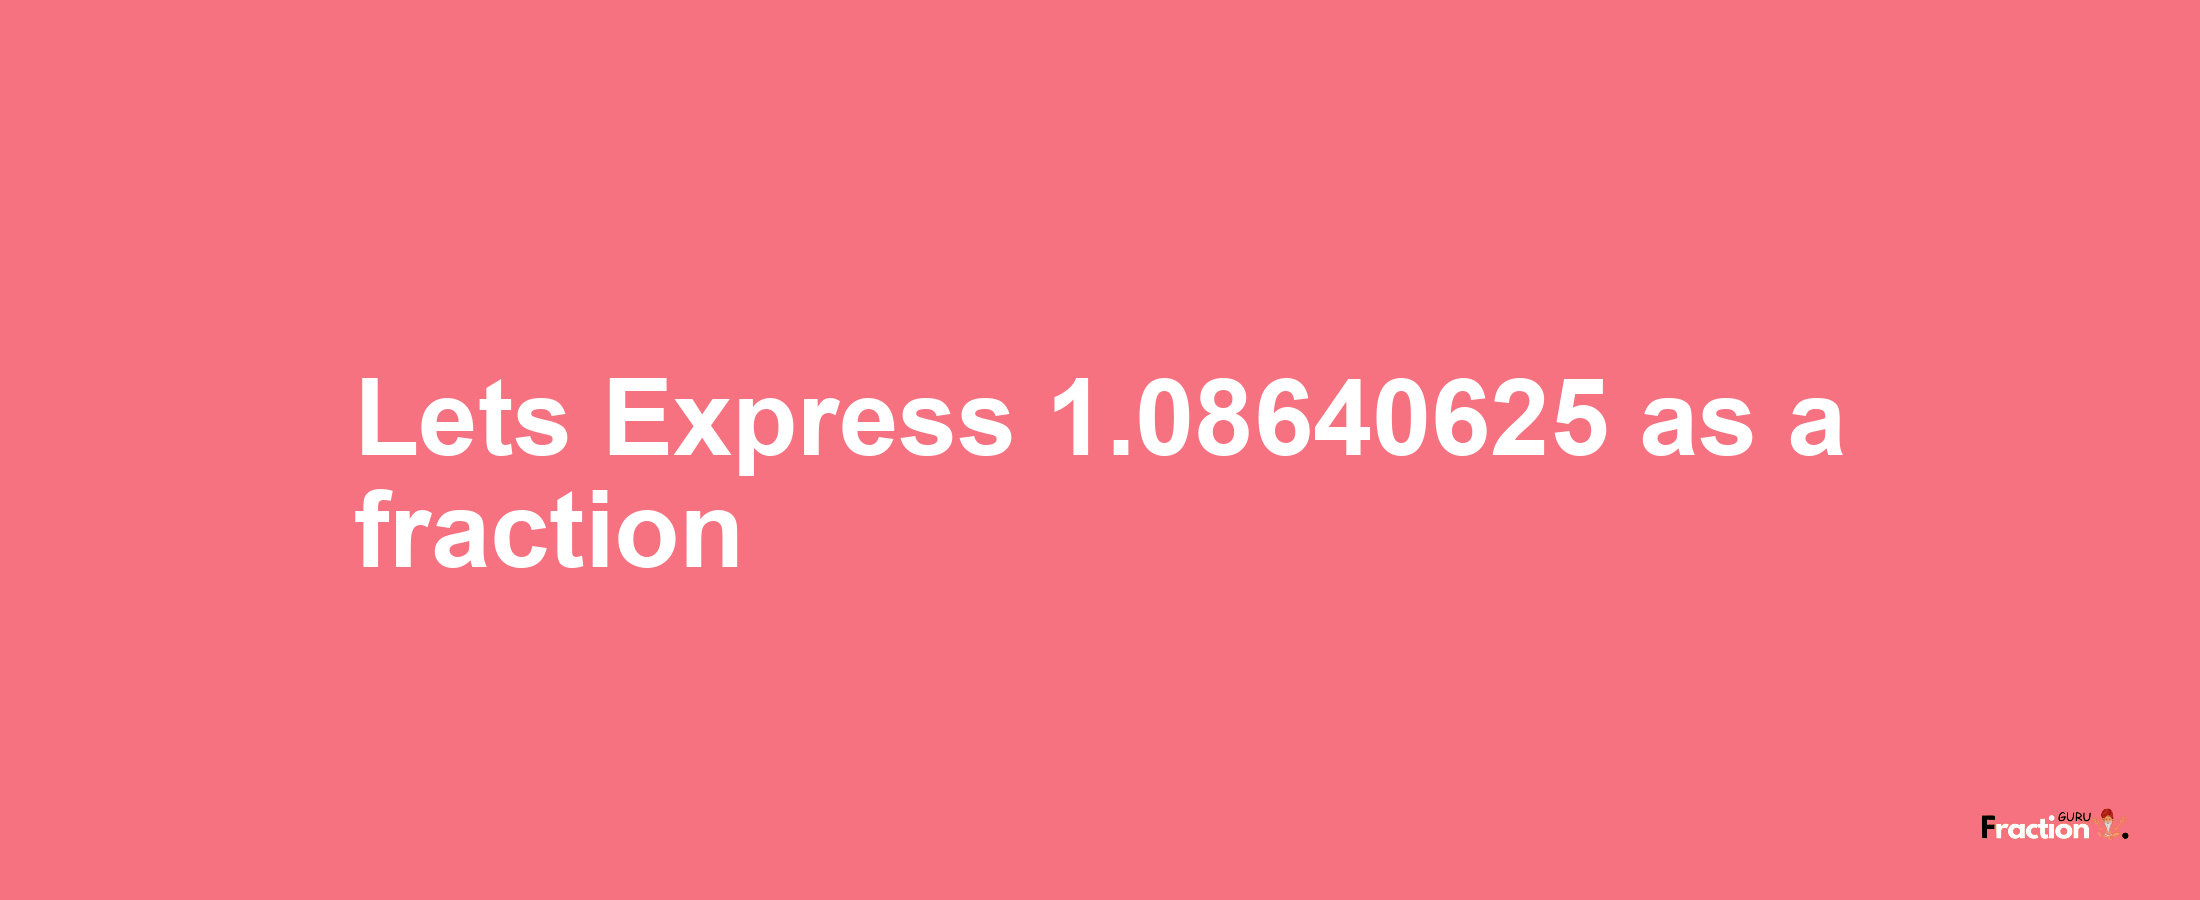 Lets Express 1.08640625 as afraction